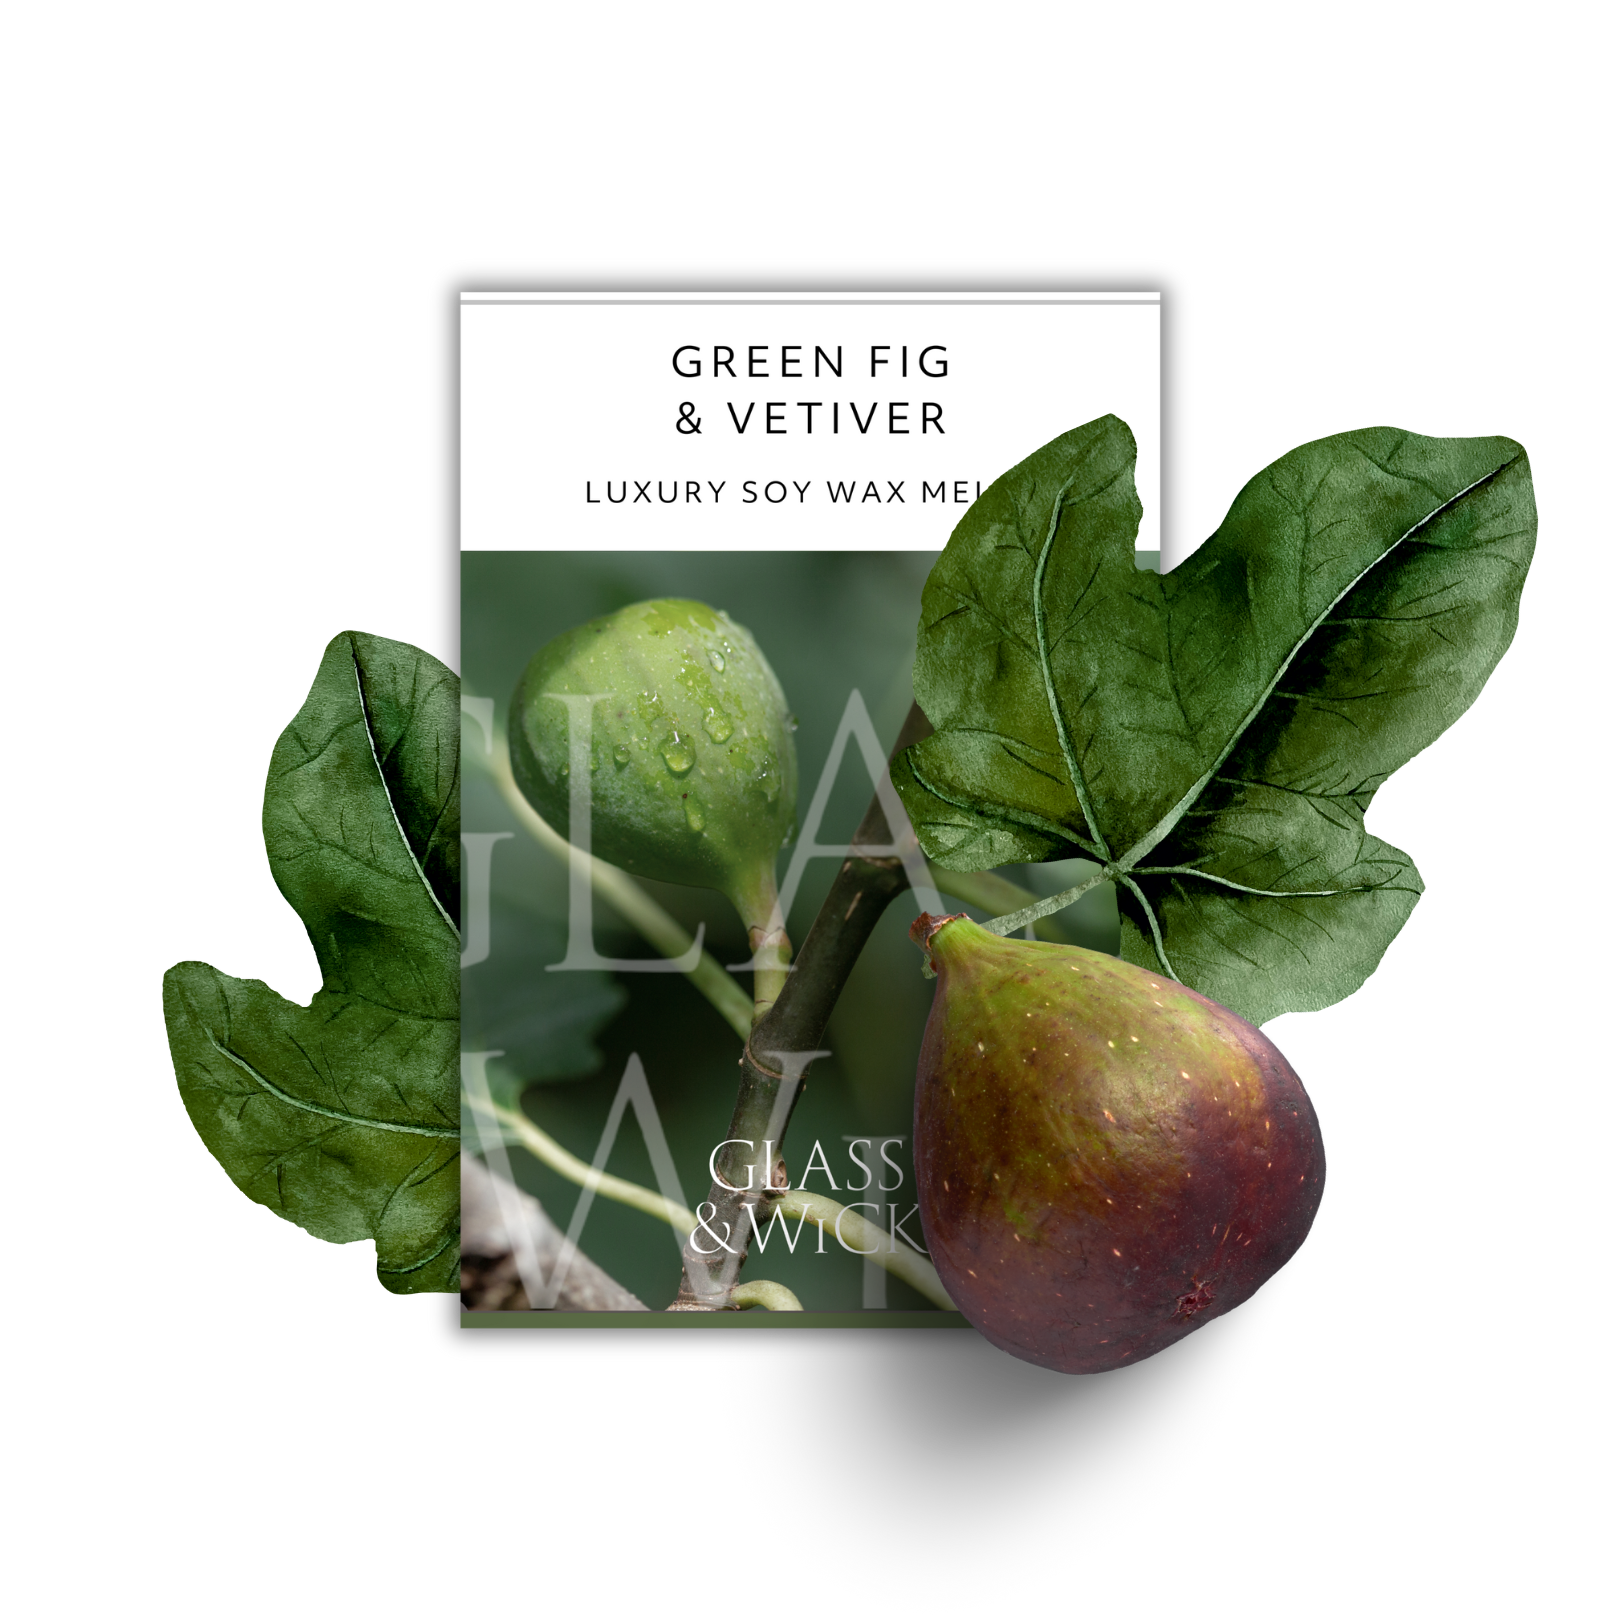 Green Fig & Vetiver Soy Wax Melts